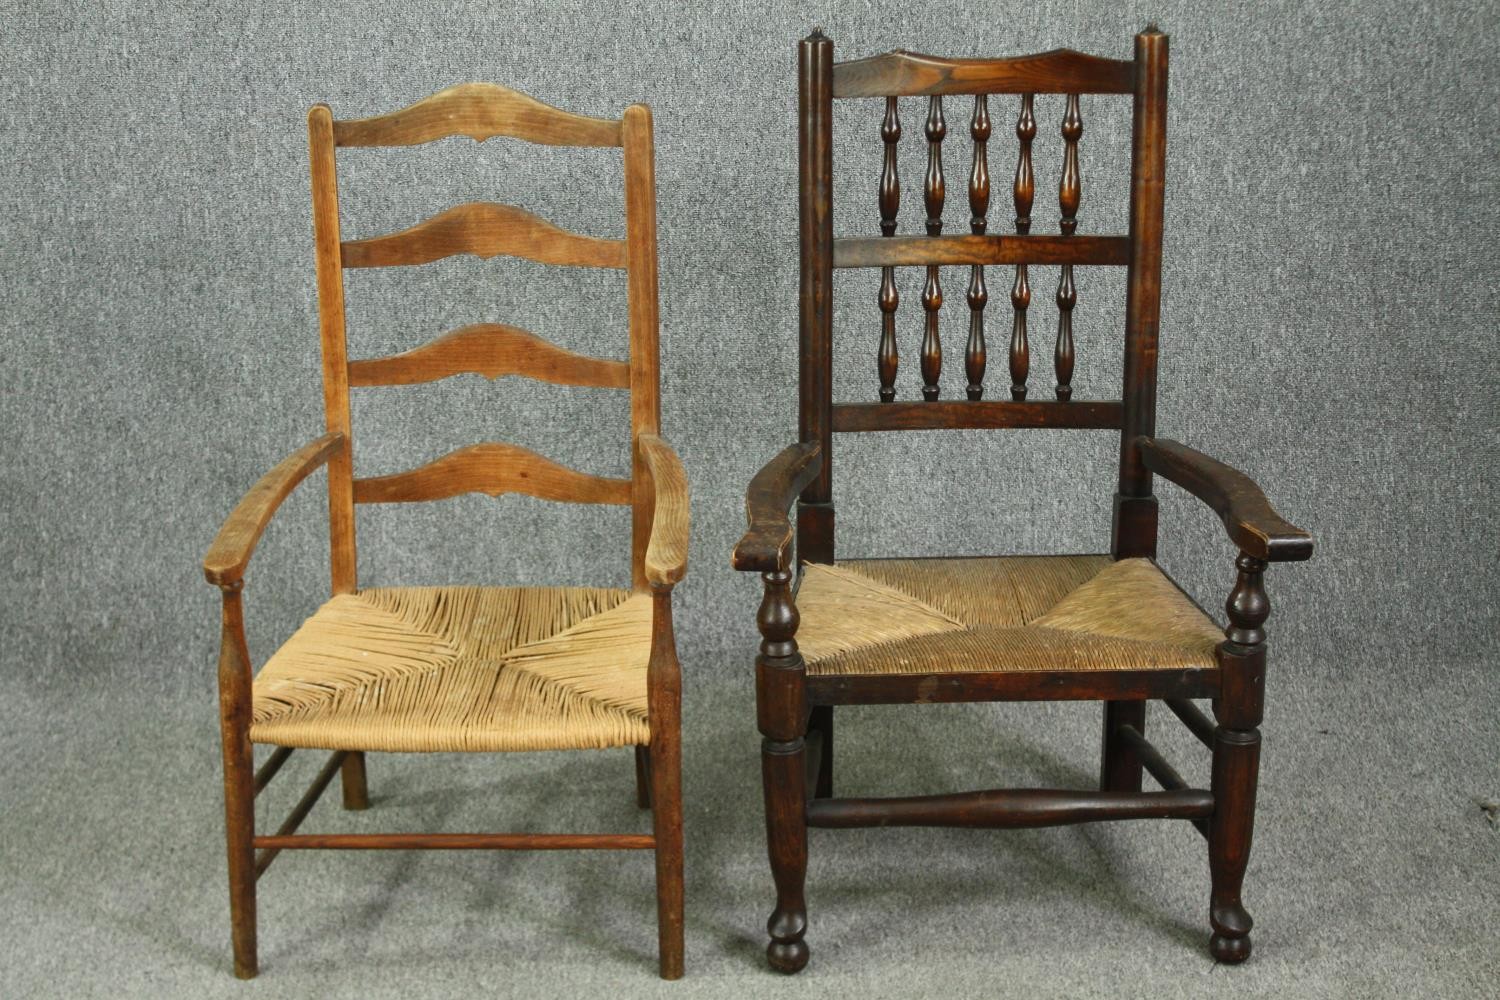 A 19th century elm Lancashire country spindle back armchair, and another with a ladderback, with